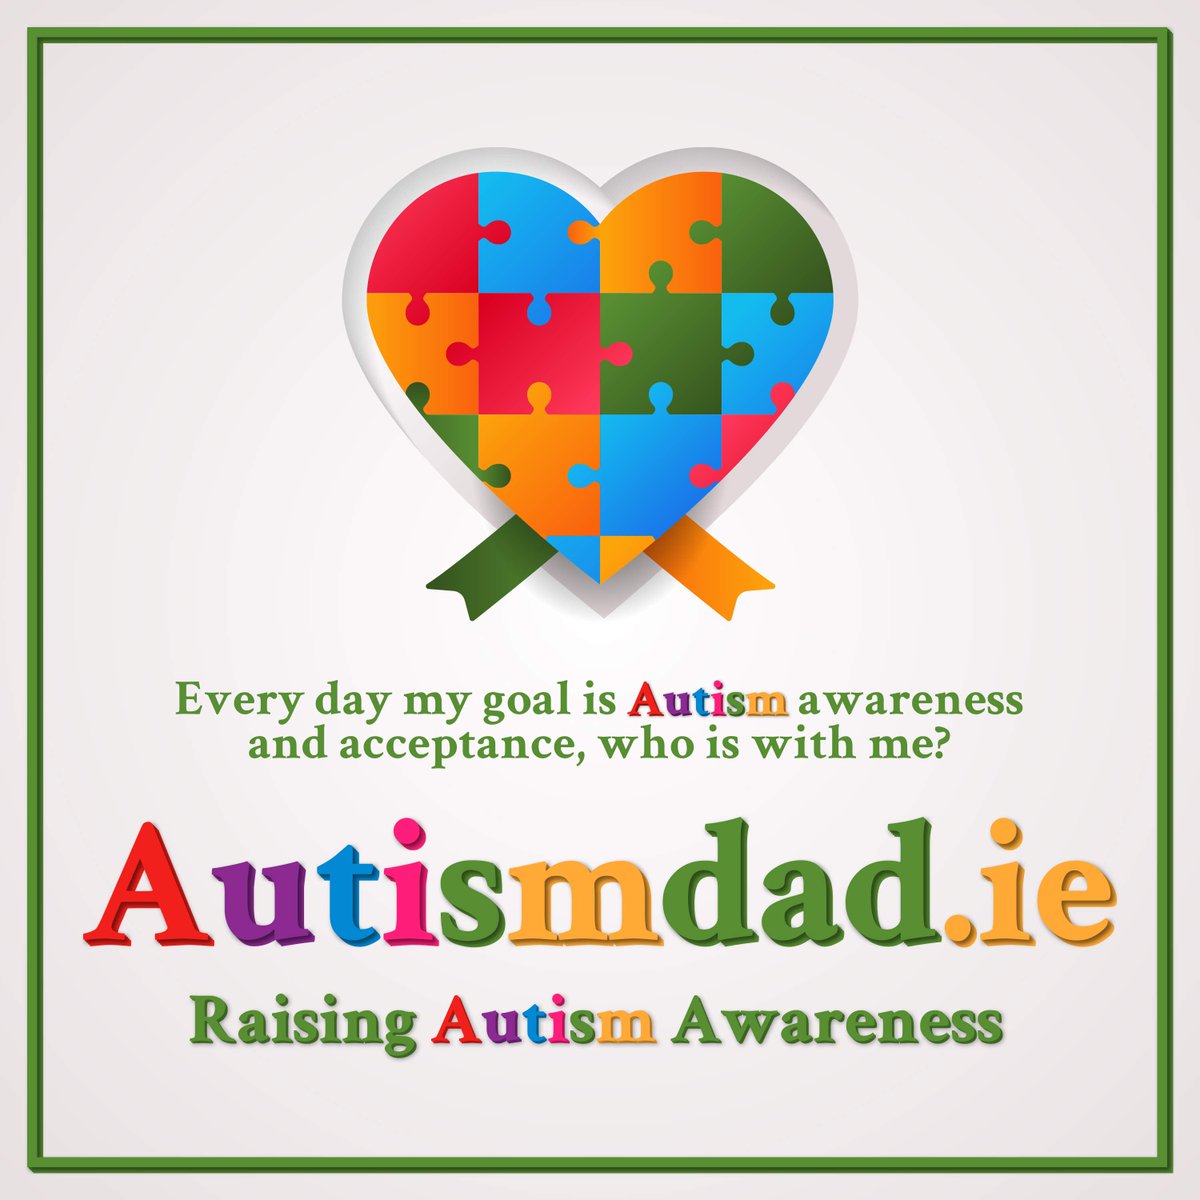 Join me in the fight for autism awareness - every voice matters in spreading understanding and acceptance for individuals on the #autism spectrum. Let's work together to create a more inclusive world for everyone. #autismawareness #inclusionmatters